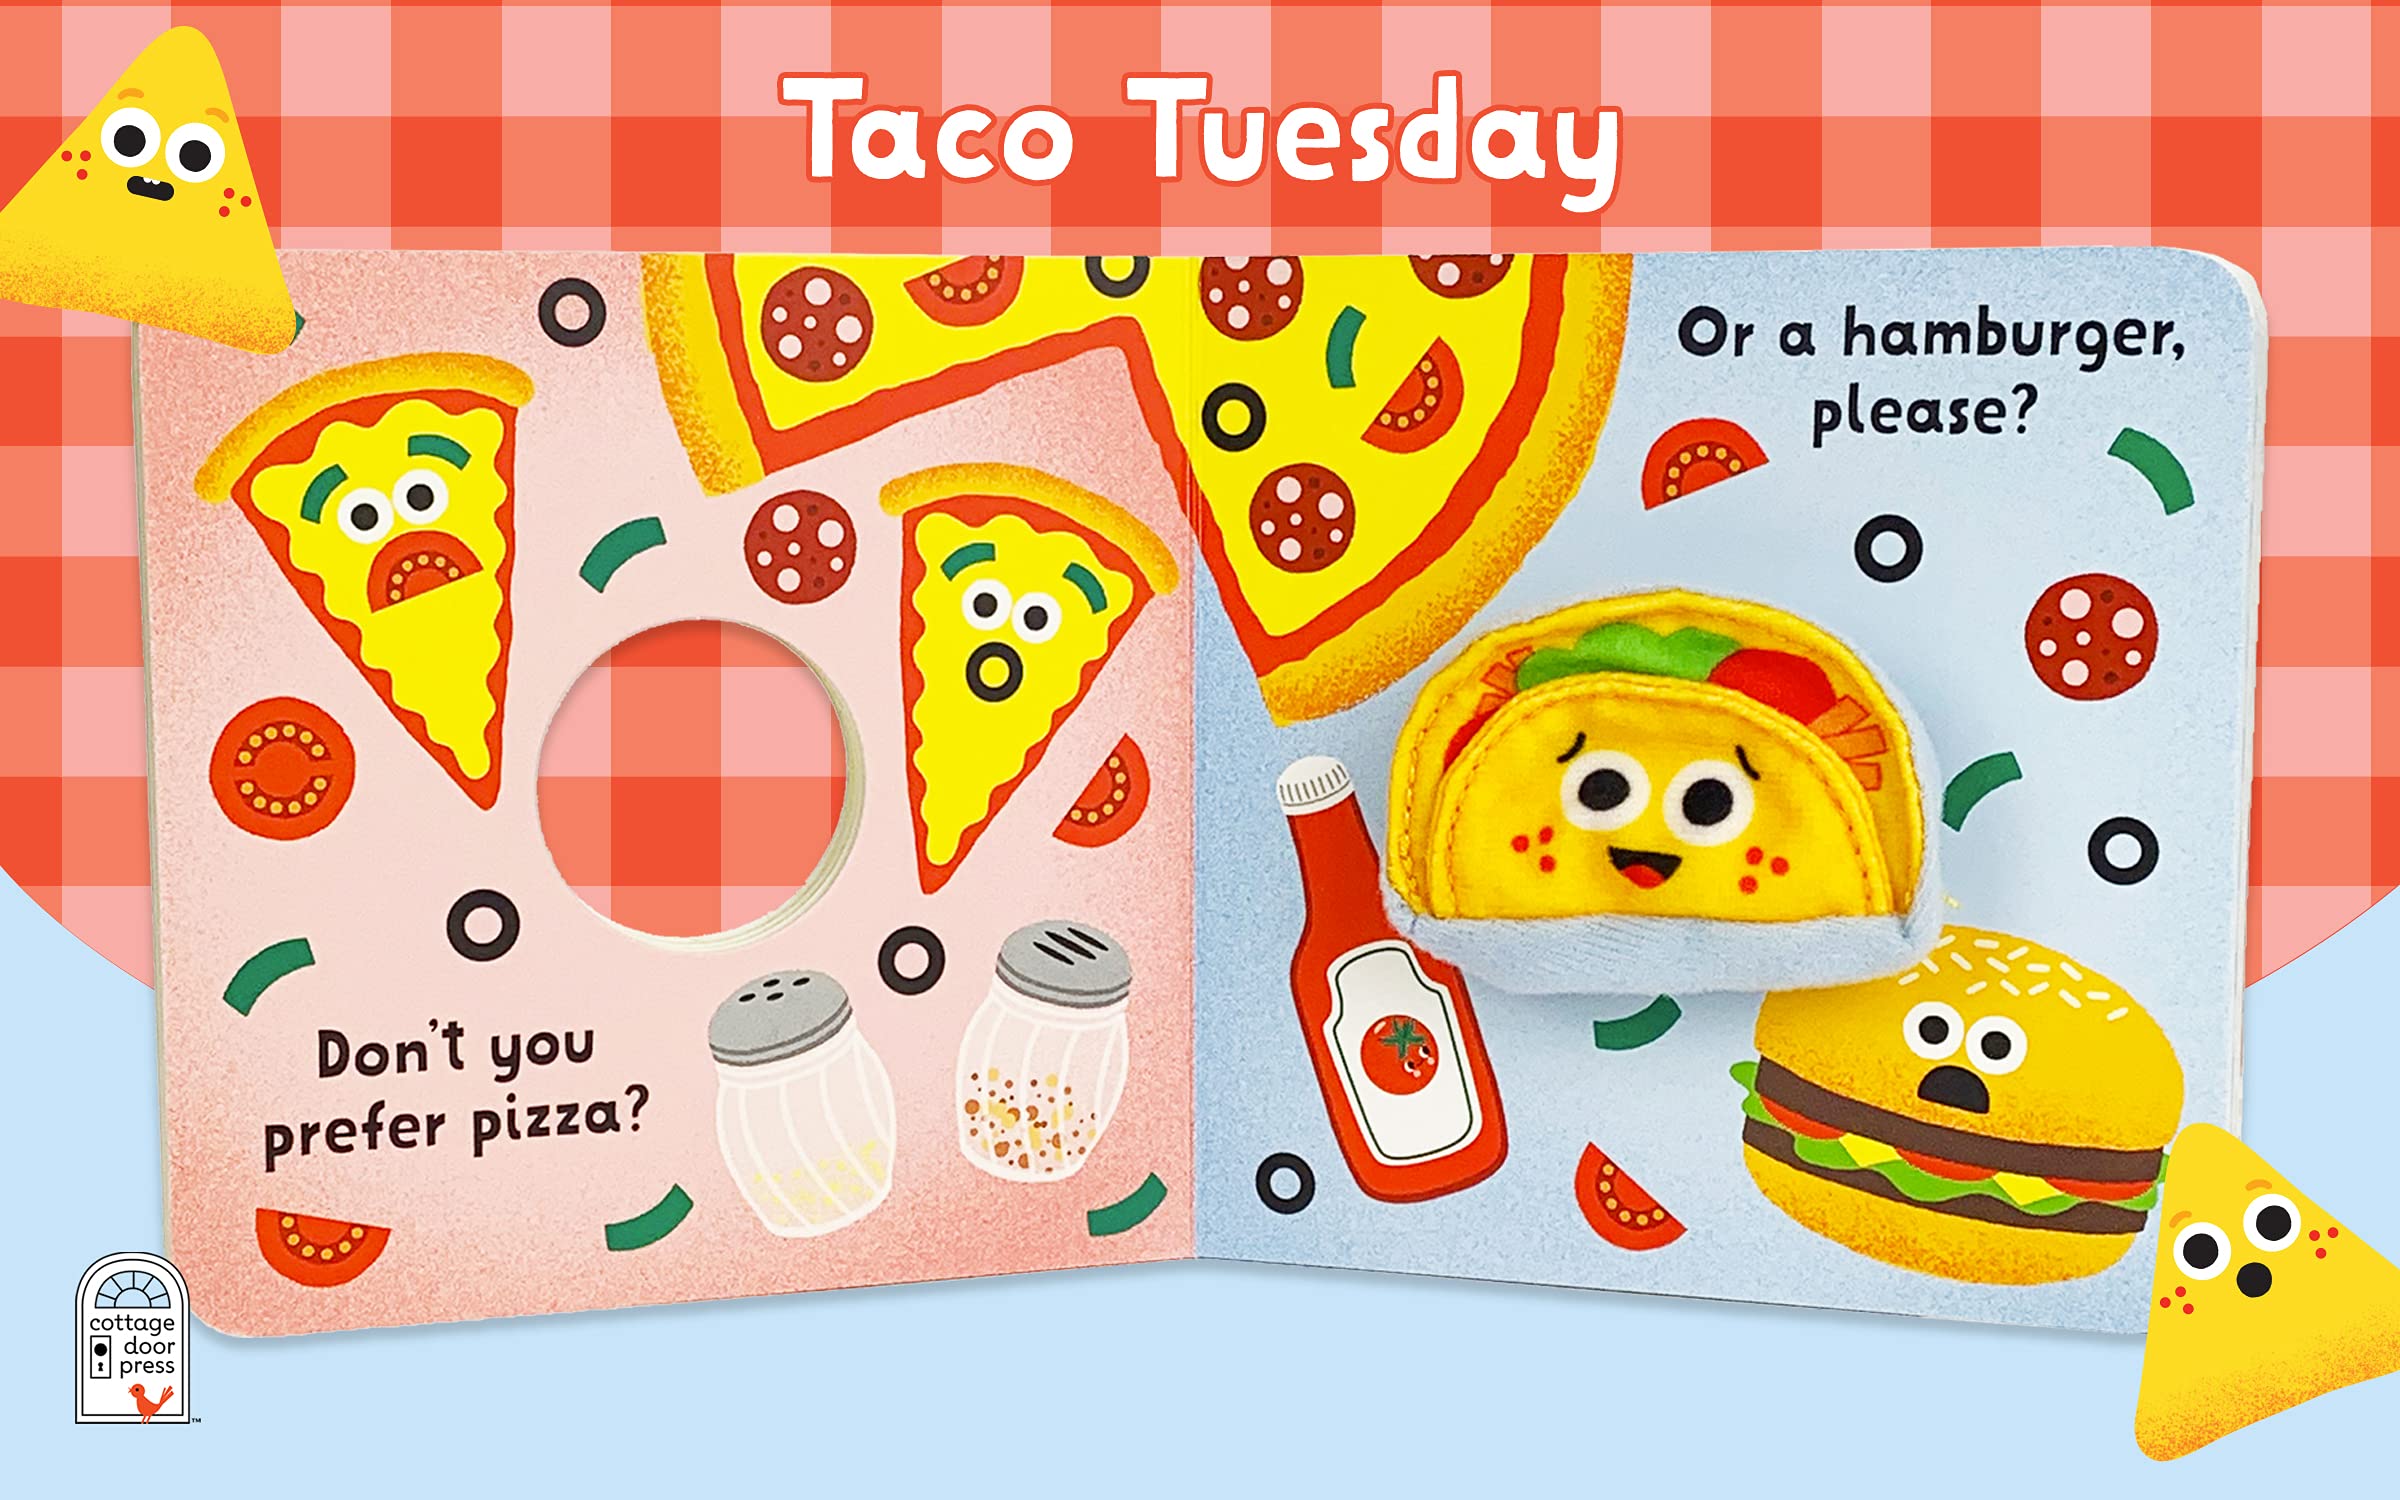 Taco Tuesday Puppet Book - Twinkle Twinkle Little One